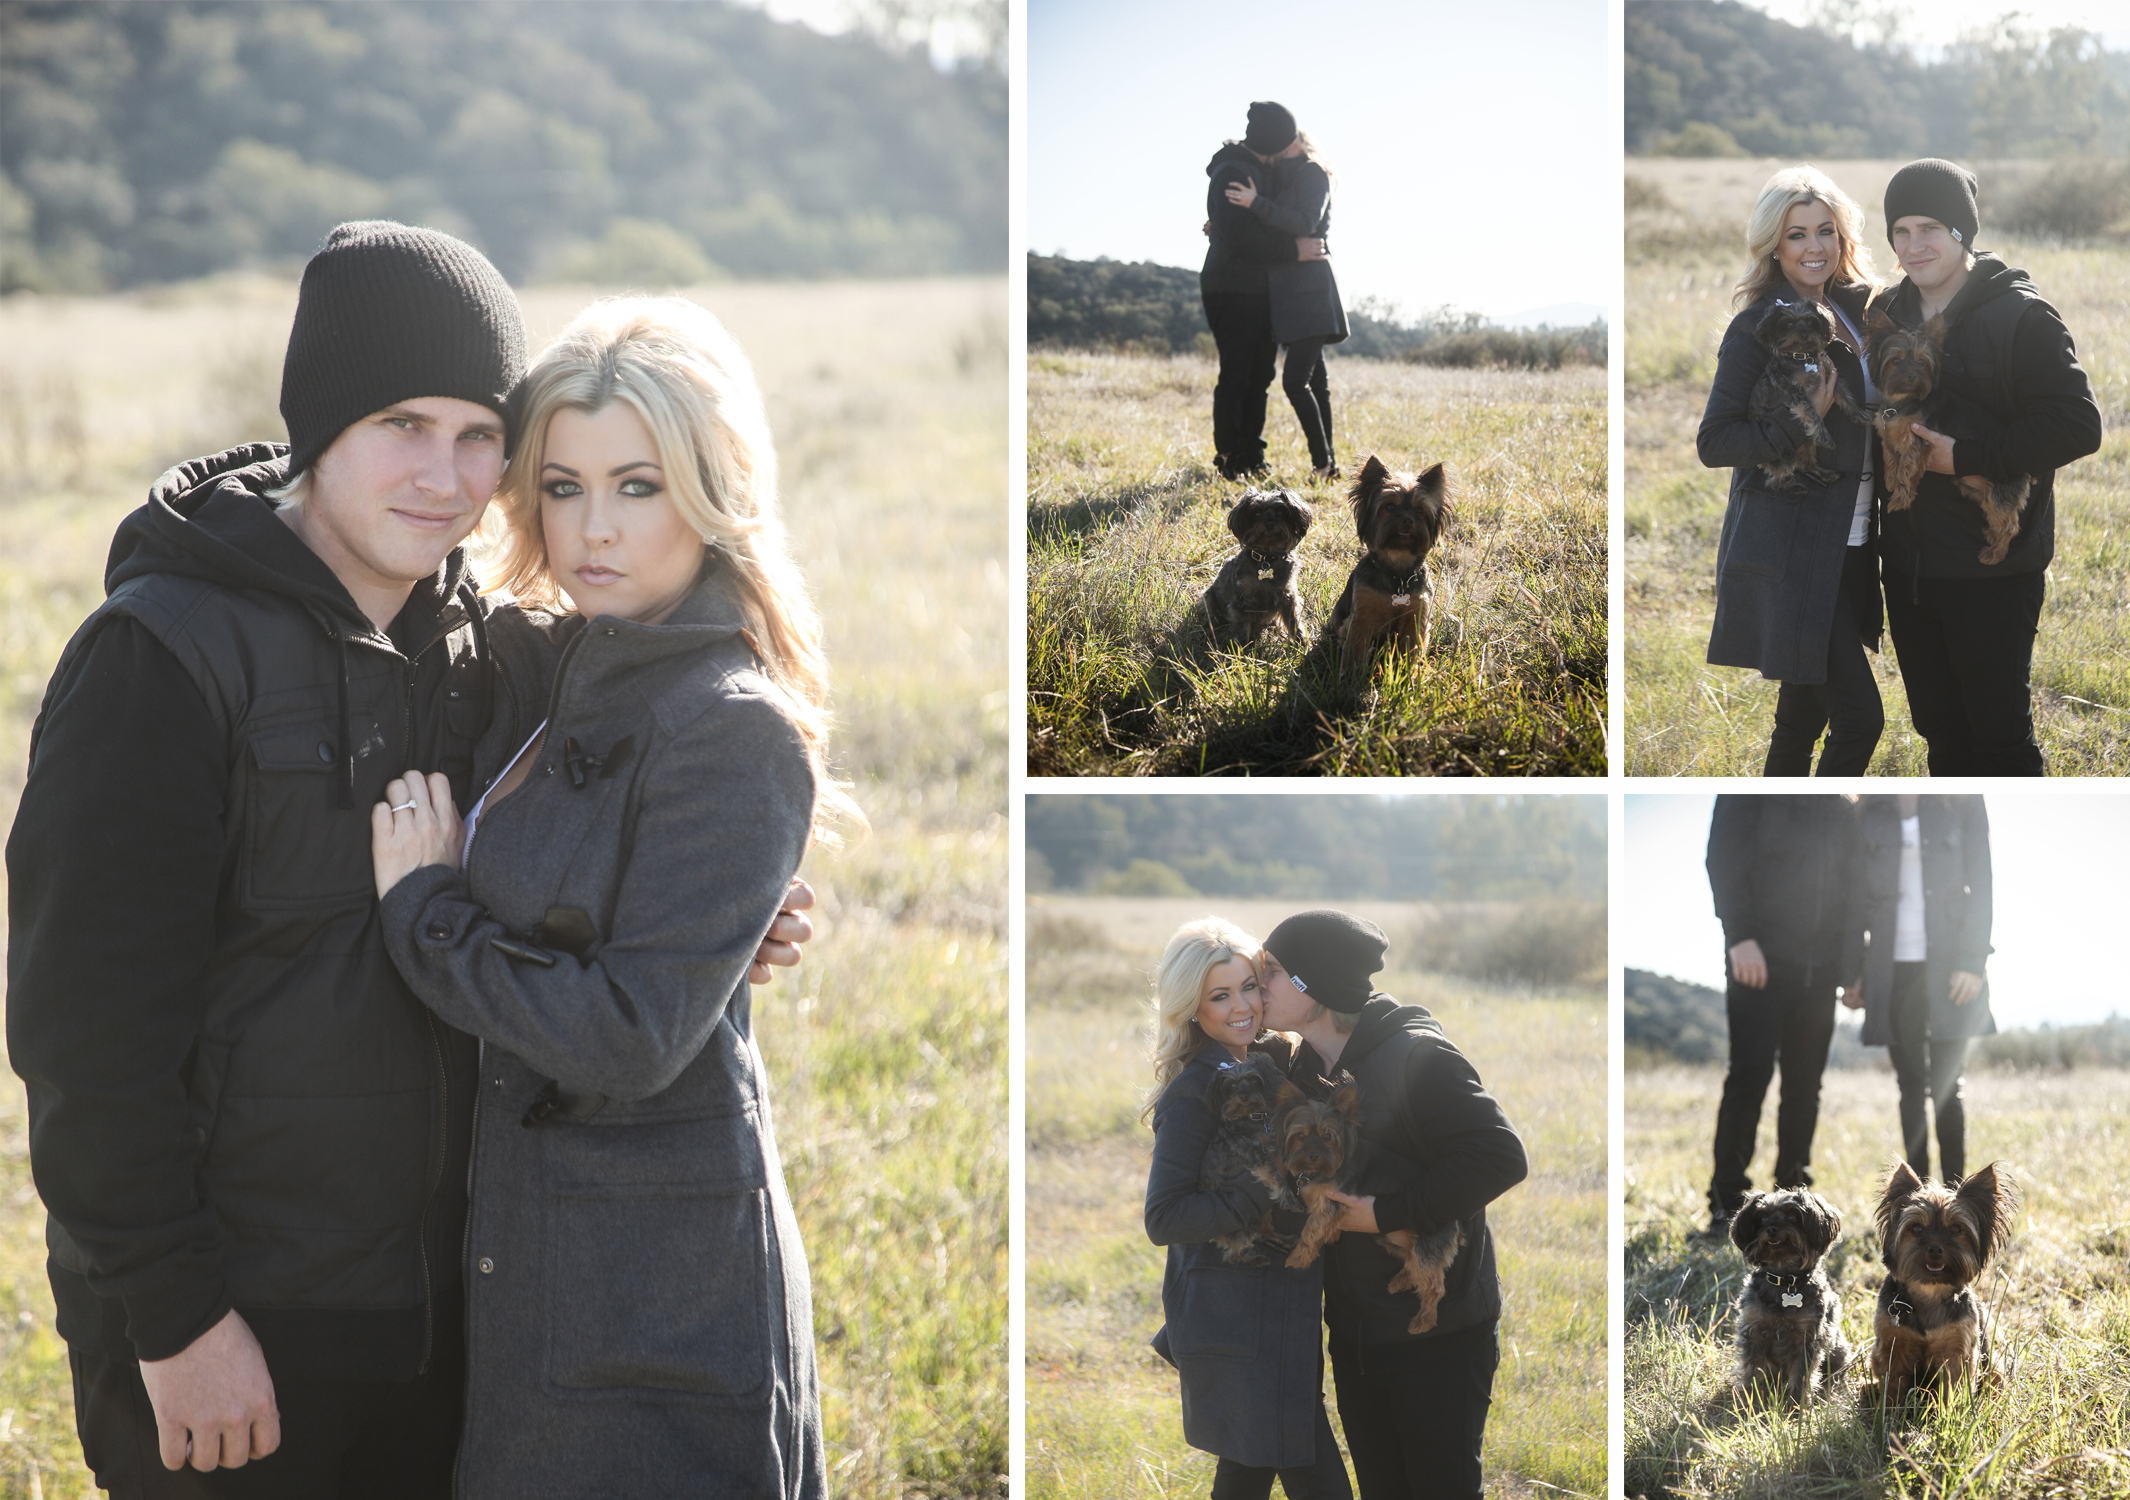 Andy-King-photography_engagement-session_shawna+ryan_web-001